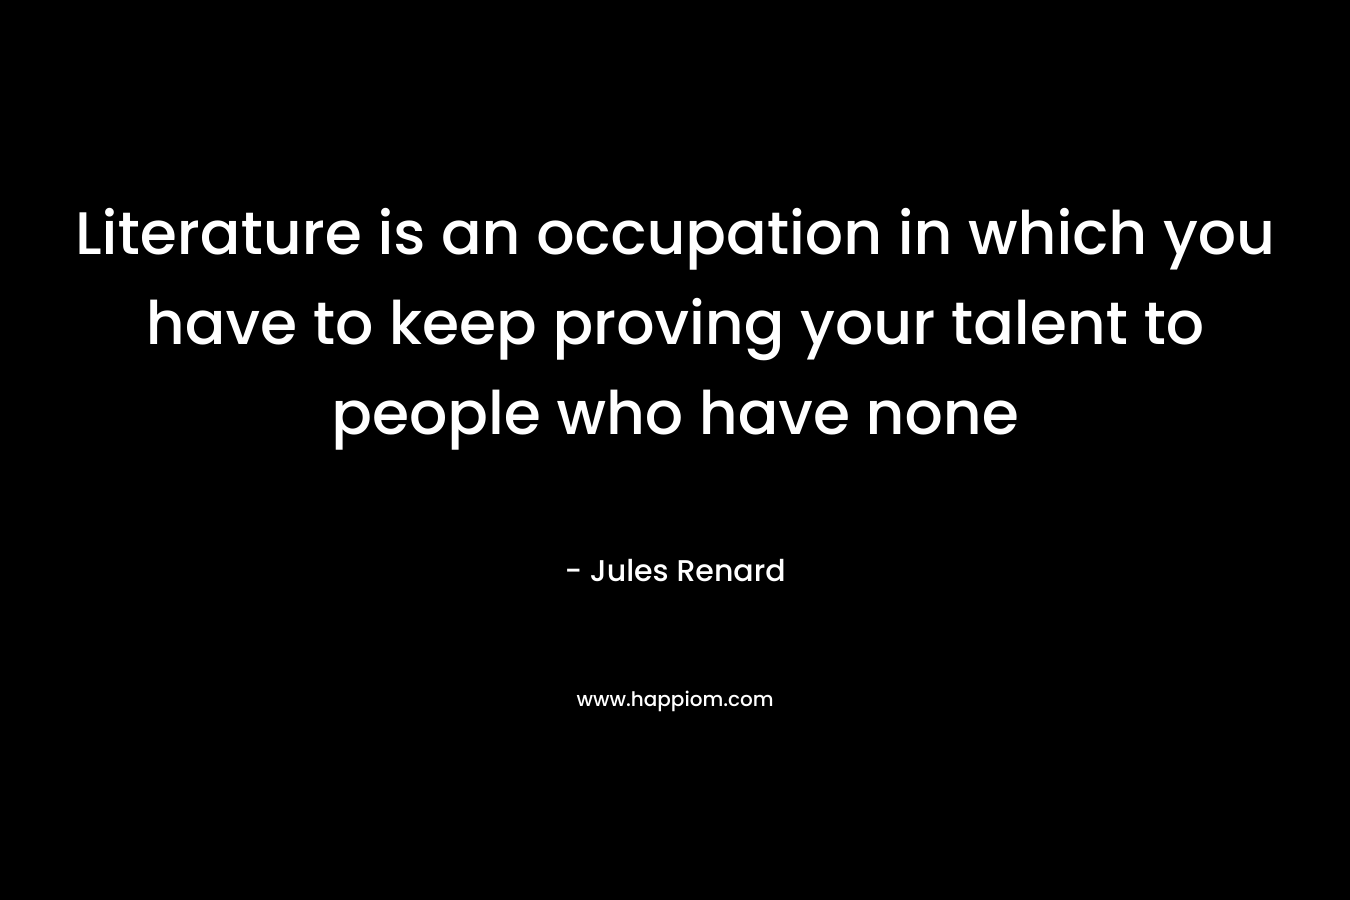 Literature is an occupation in which you have to keep proving your talent to people who have none – Jules Renard